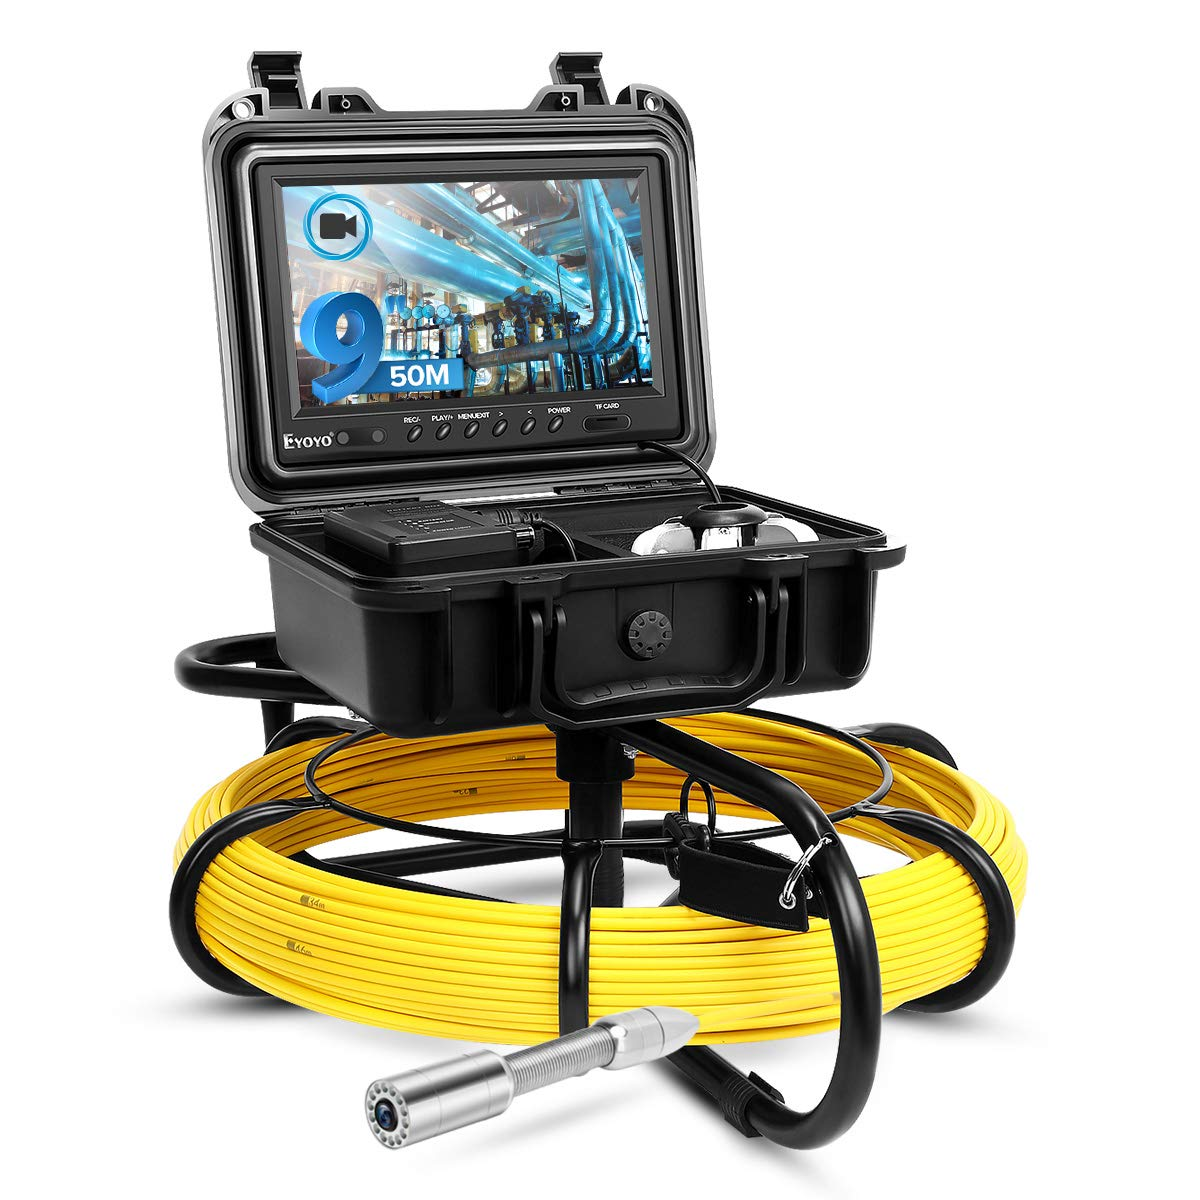 30M Sewer Waterproof Camera 7" LCD Drain Pipe Pipeline Inspection System DVR 